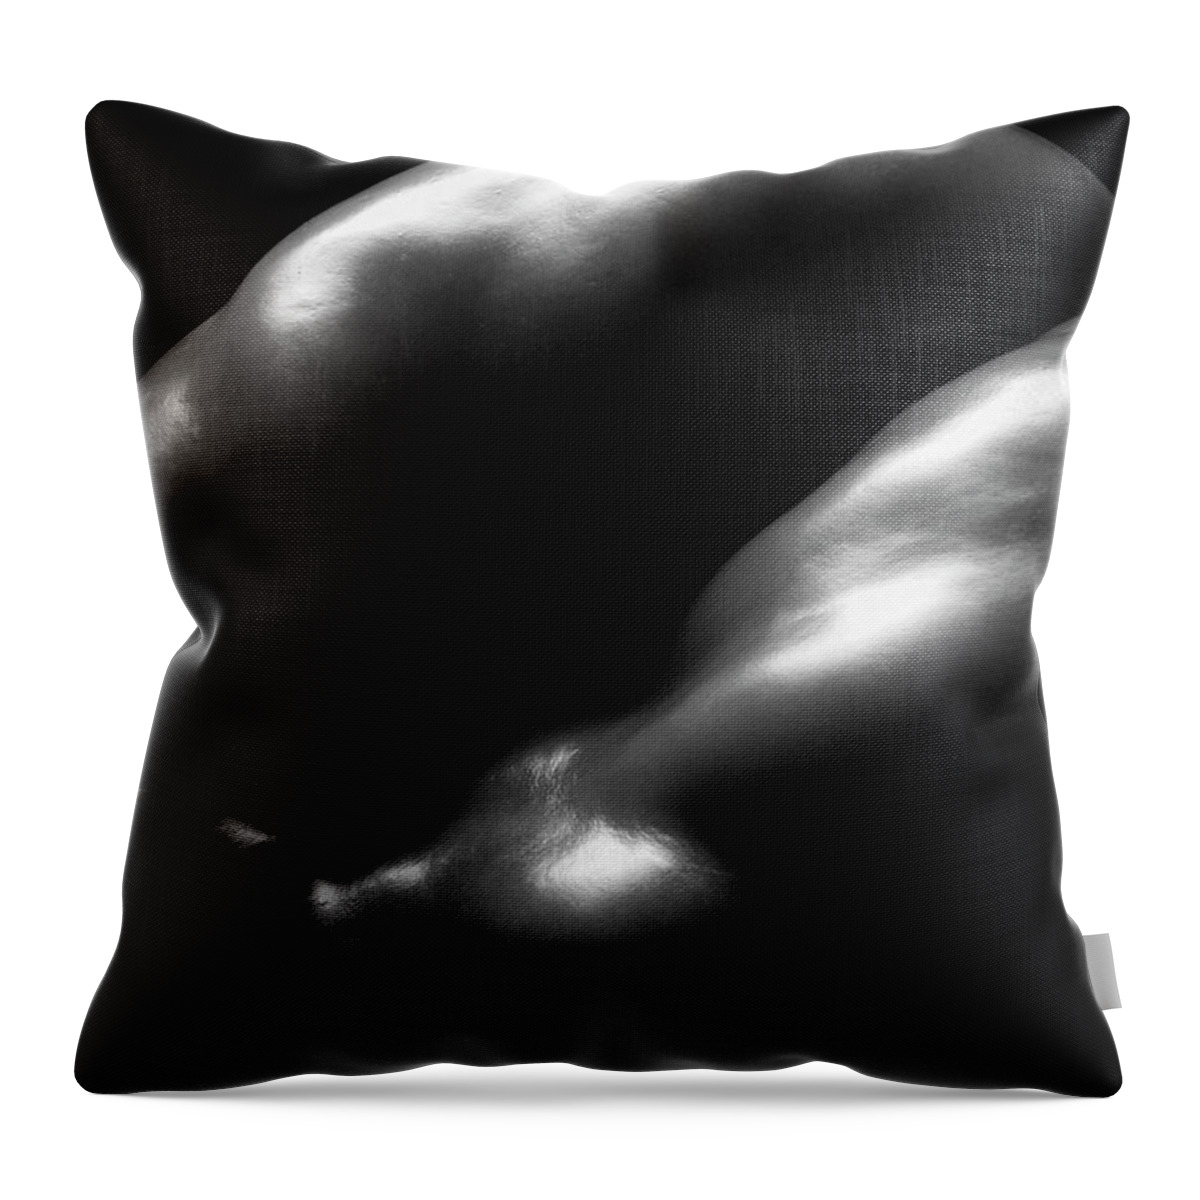 Black & White Throw Pillow featuring the photograph Delicate by Frederic A Reinecke